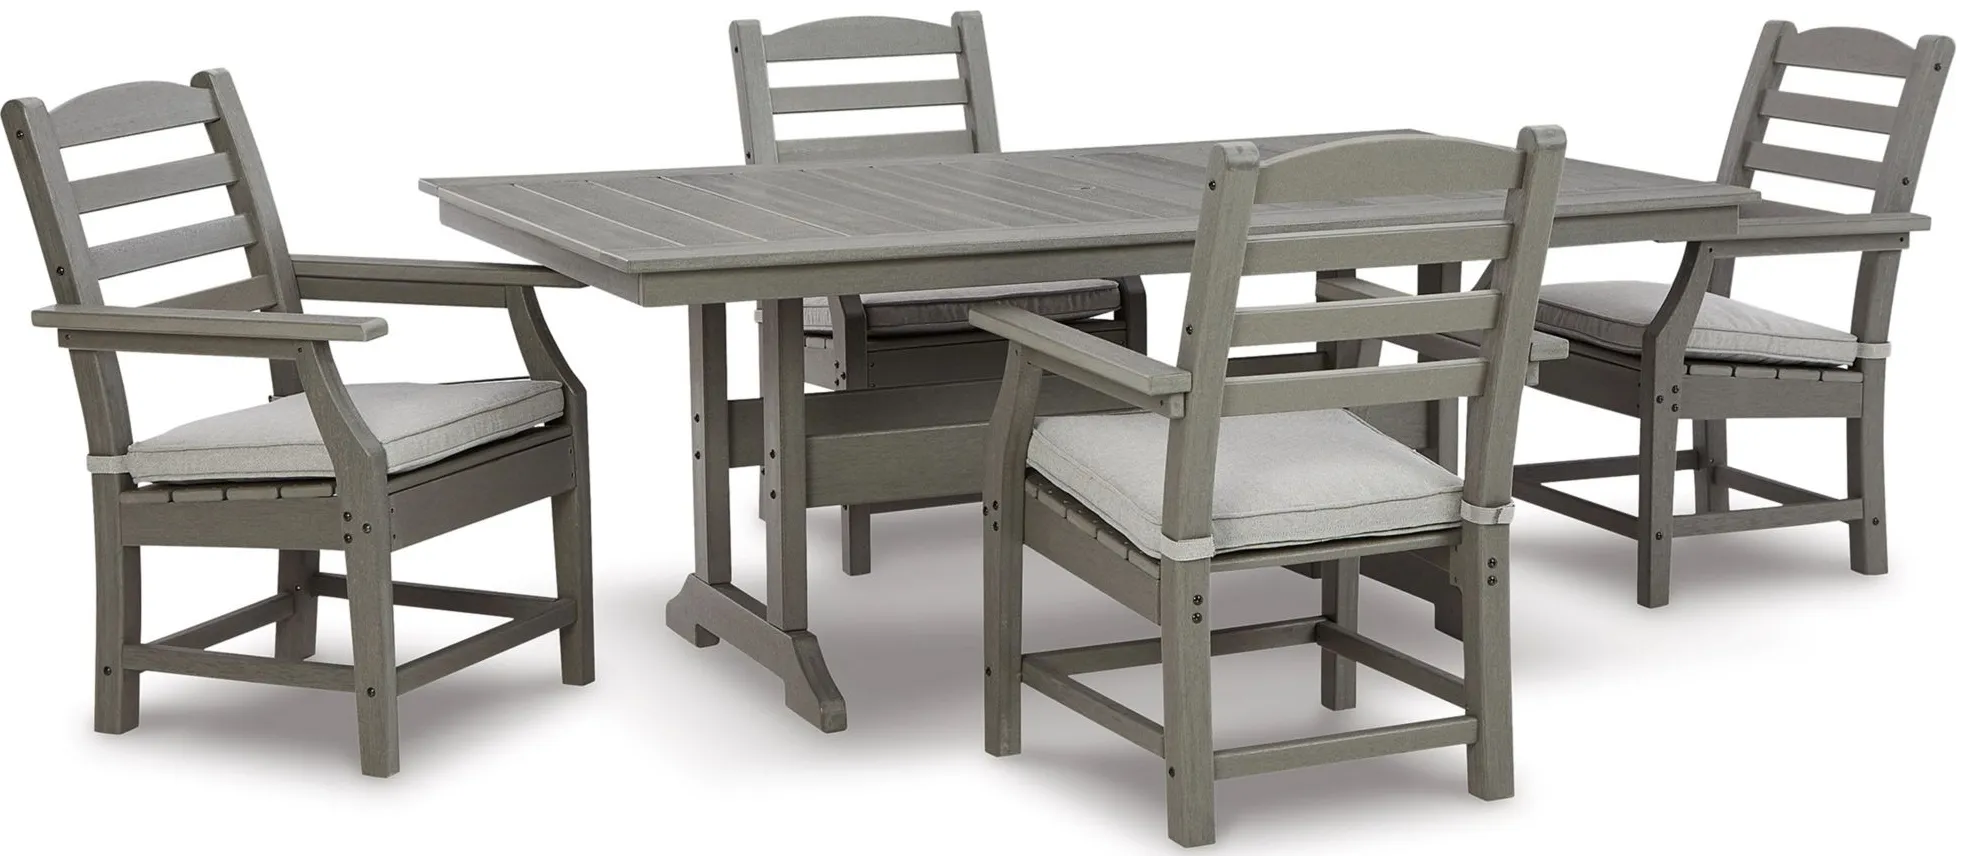 Visola 5-pc. Outdoor Dining Set in Gray by Ashley Furniture